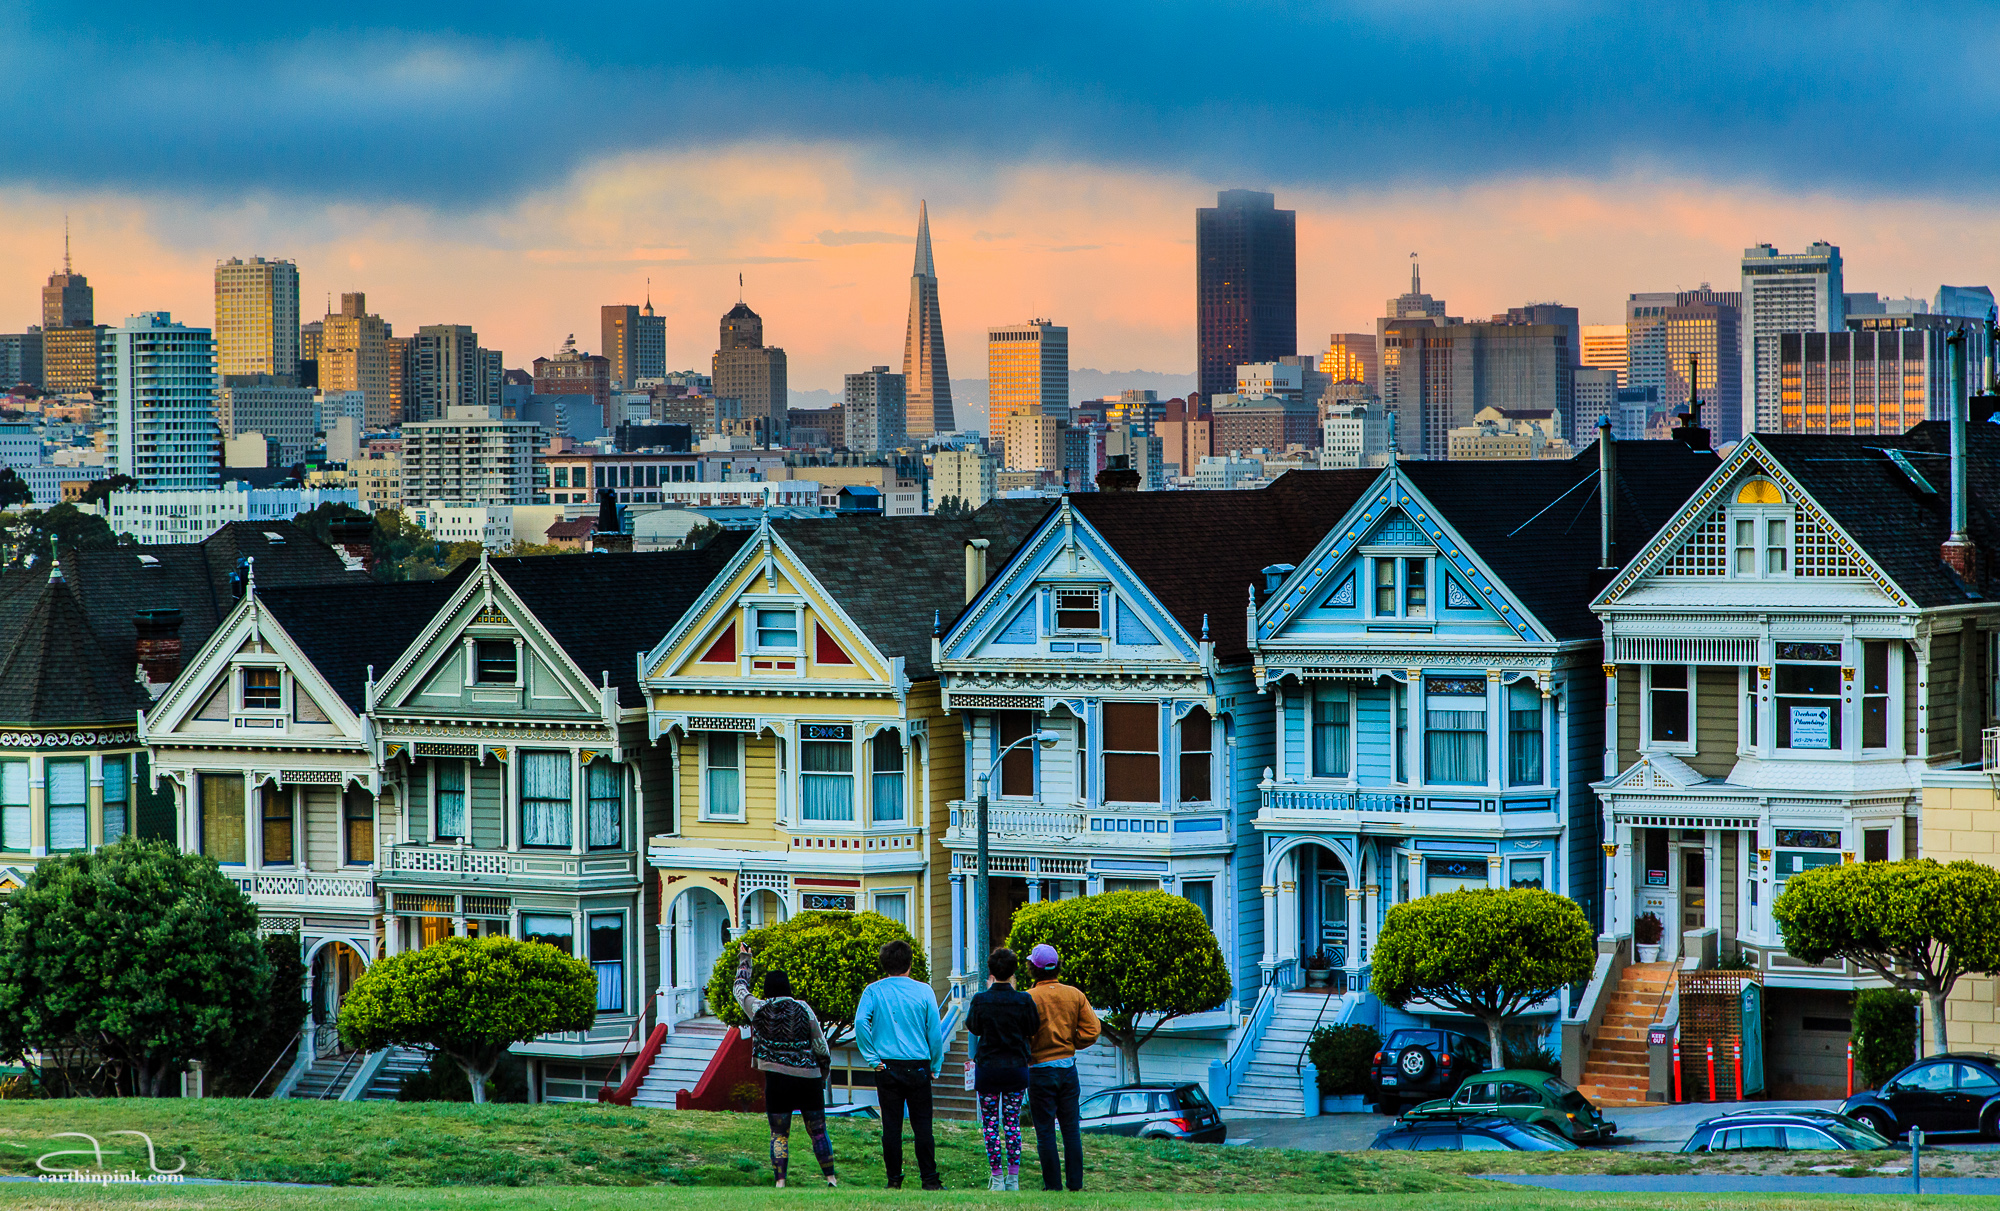 The Victorian architecture of the famous Painted Ladies in Alamo Square contrasts with San Francisco's modern skyscrapers seen in the background.